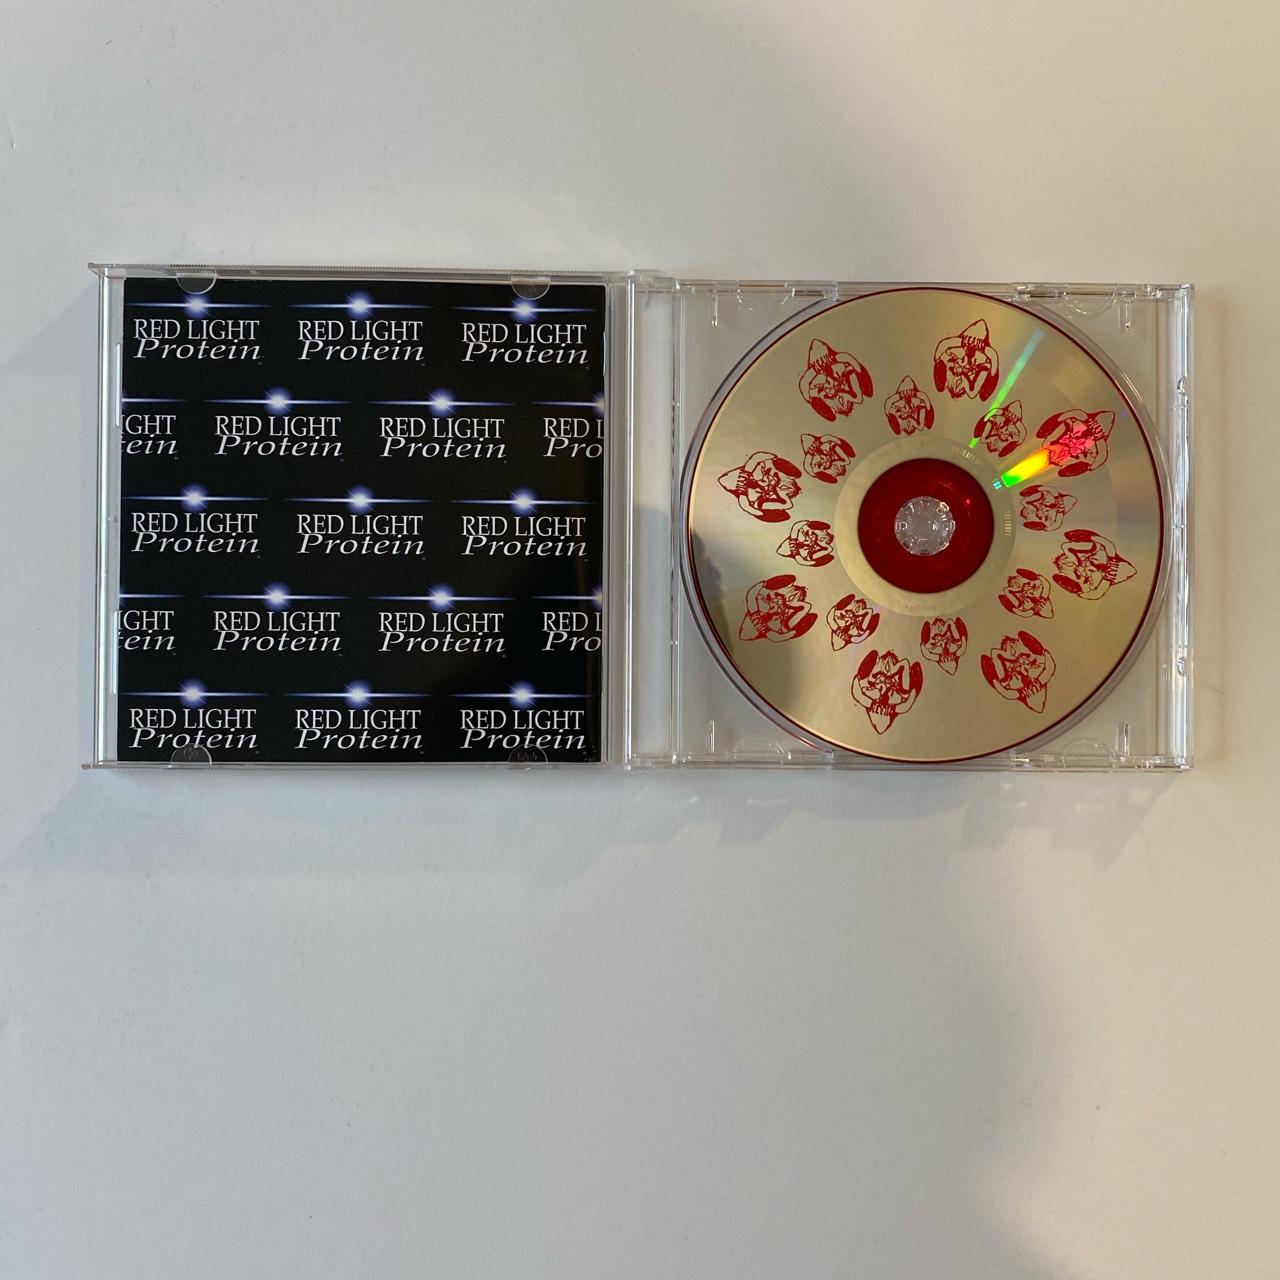 Bladee Red Light CD Don’t want to sell but will... - Depop